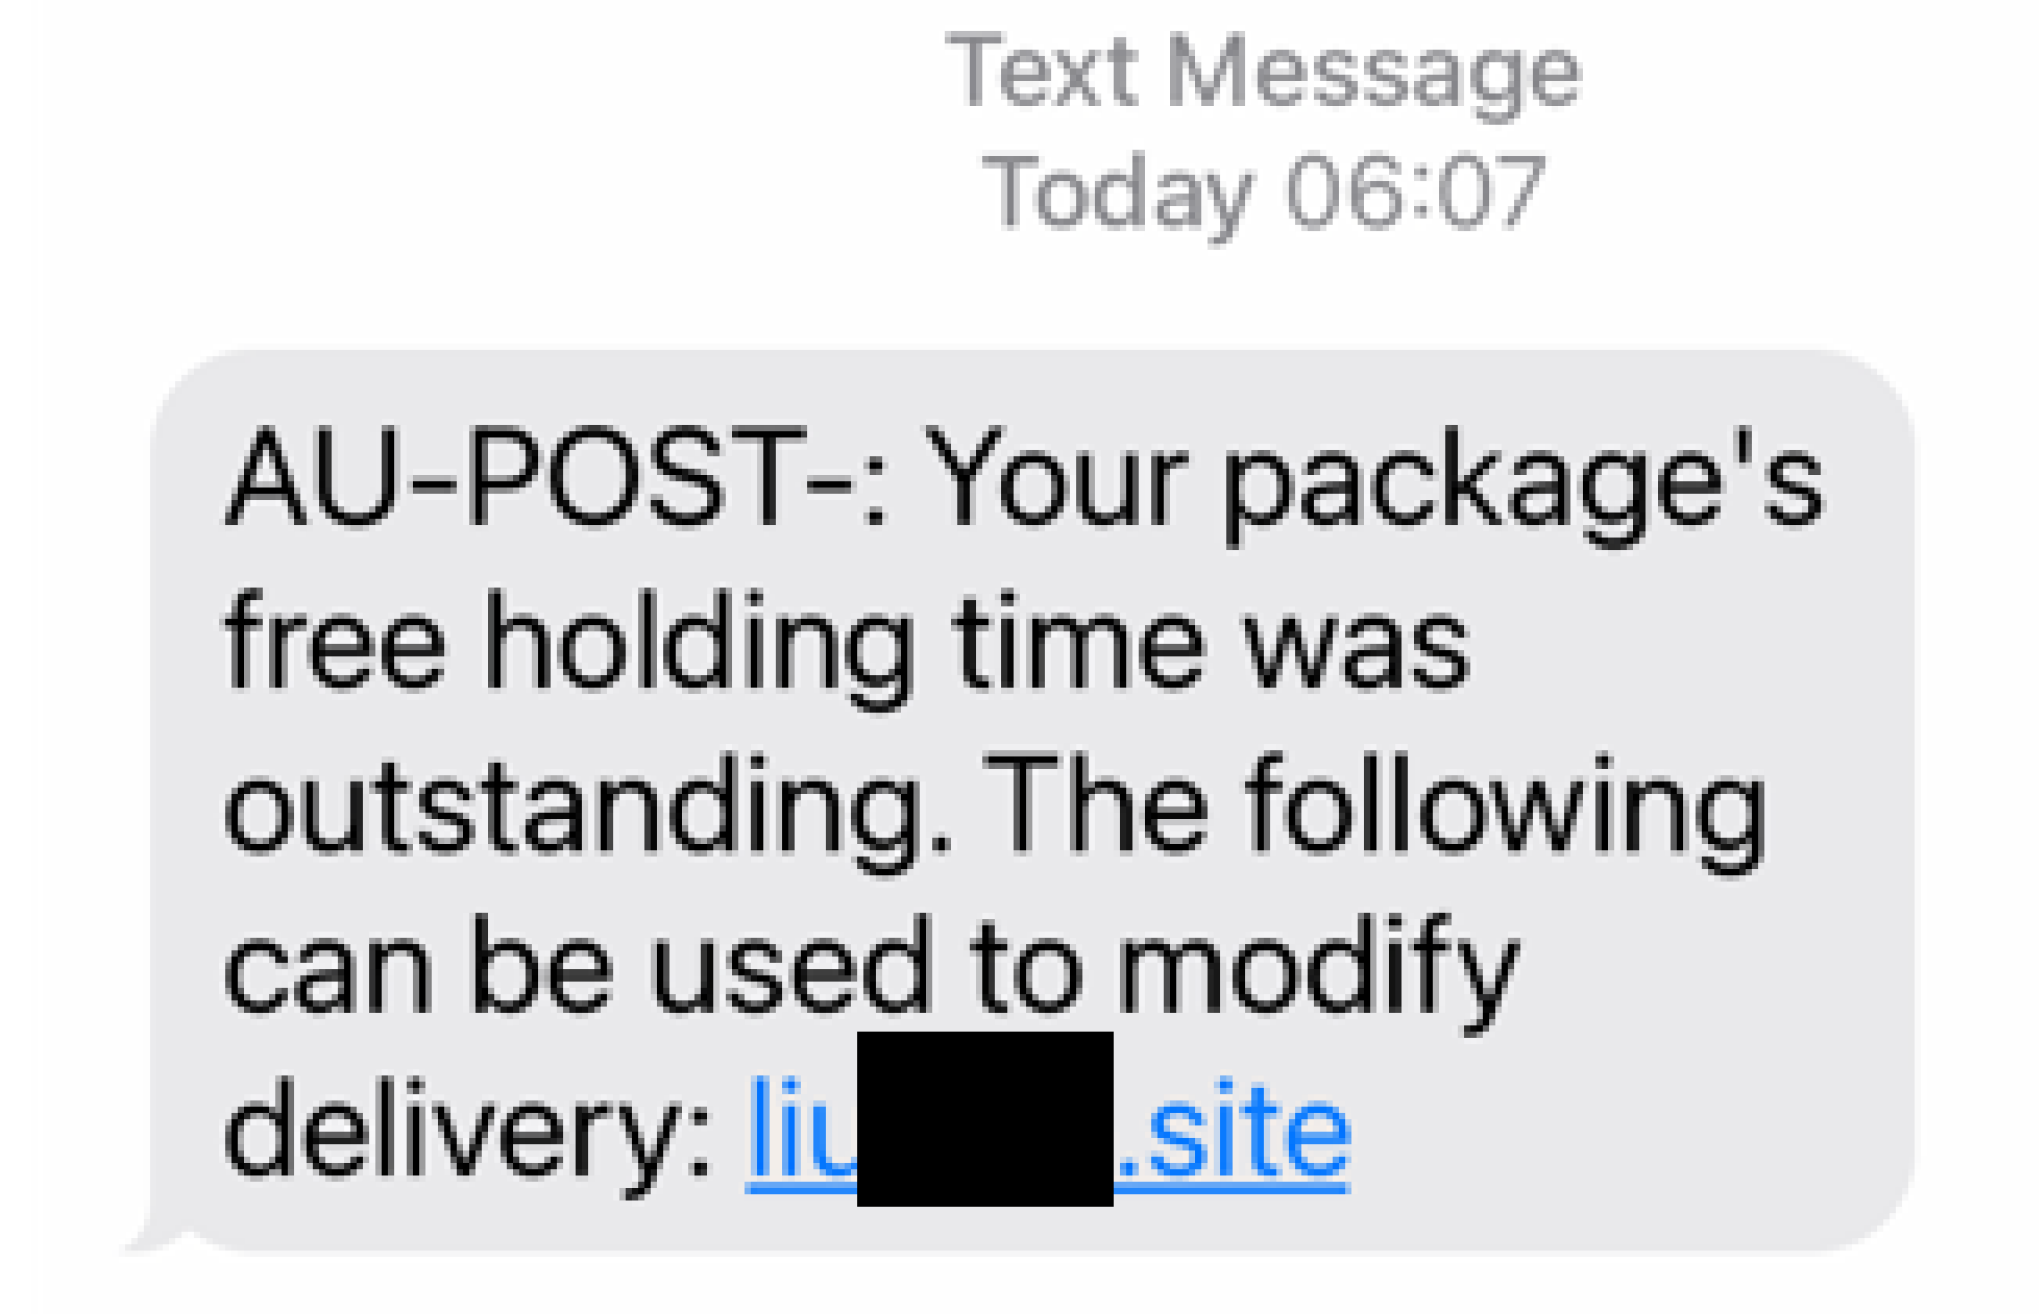 A screenshot of a text from a scammer posing as Australia Post, with a link that supposedly "can by used to modify delivery"